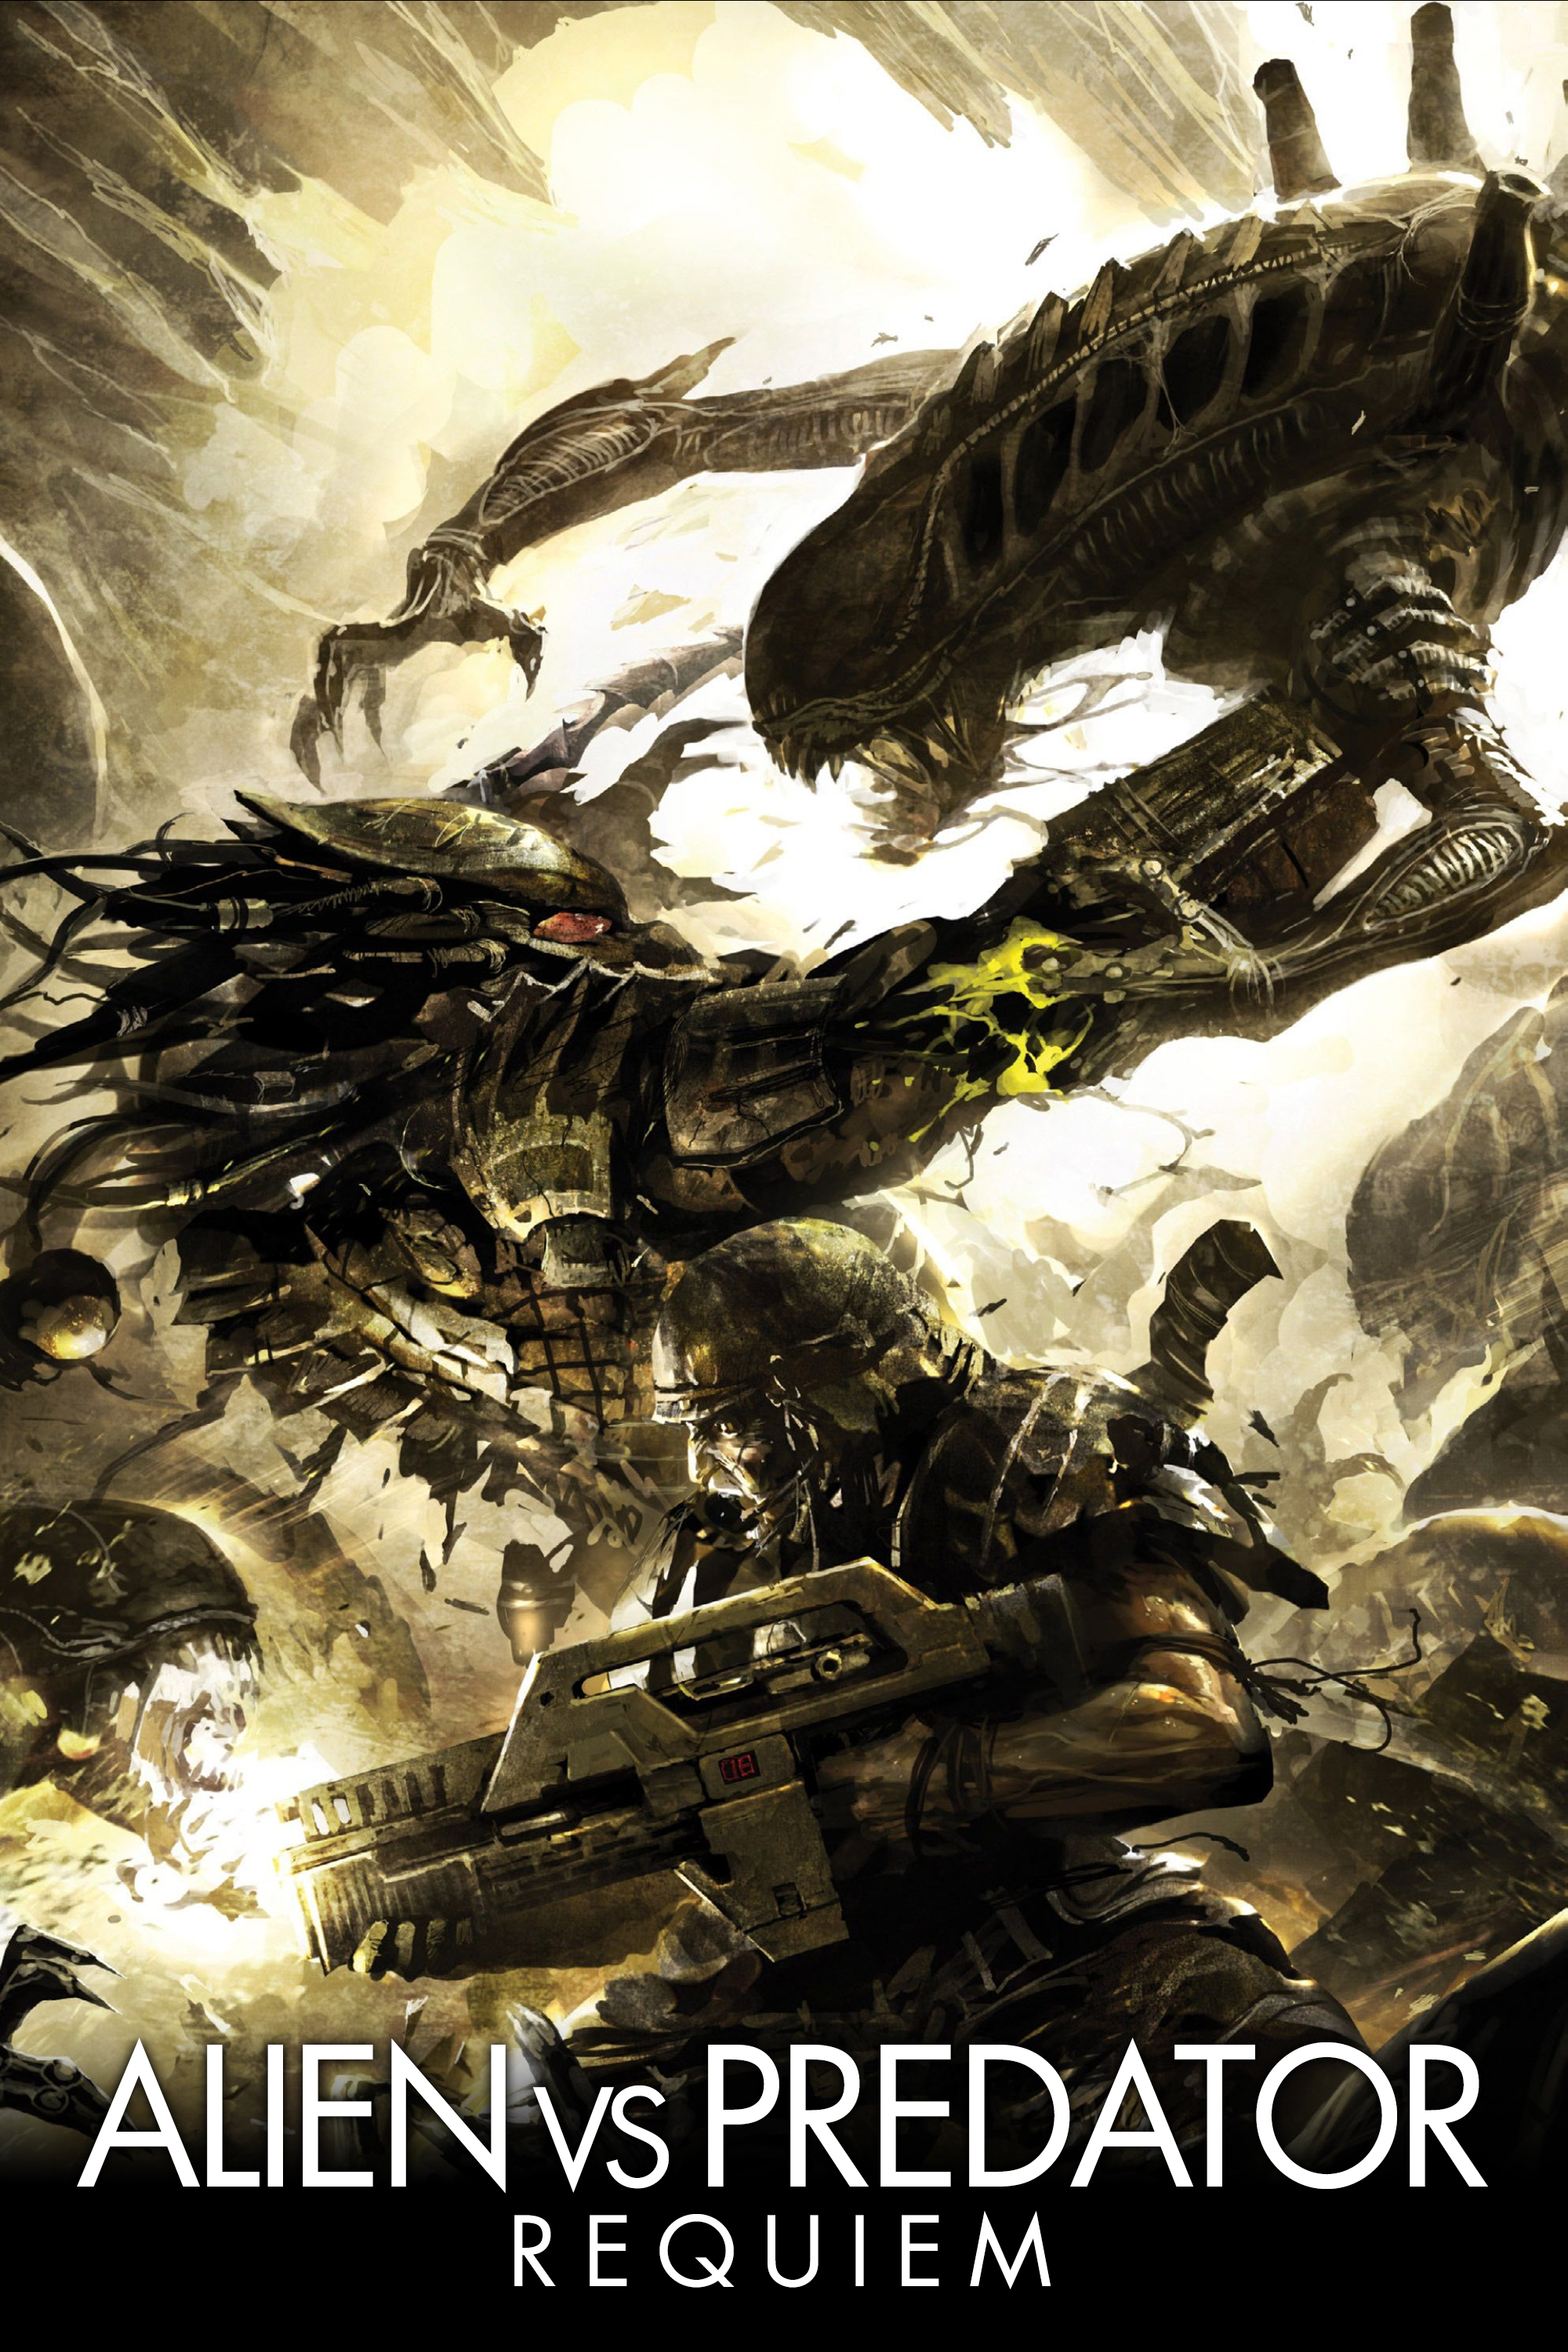 Aliens Vs Predator Requiem 2007 Hindi Dual Audio 1080p Bluray 1 5gb Esub Download 8xseries Watch next (2007) hindi dubbed from player 1 below. 8xseries one stop place for movies and series